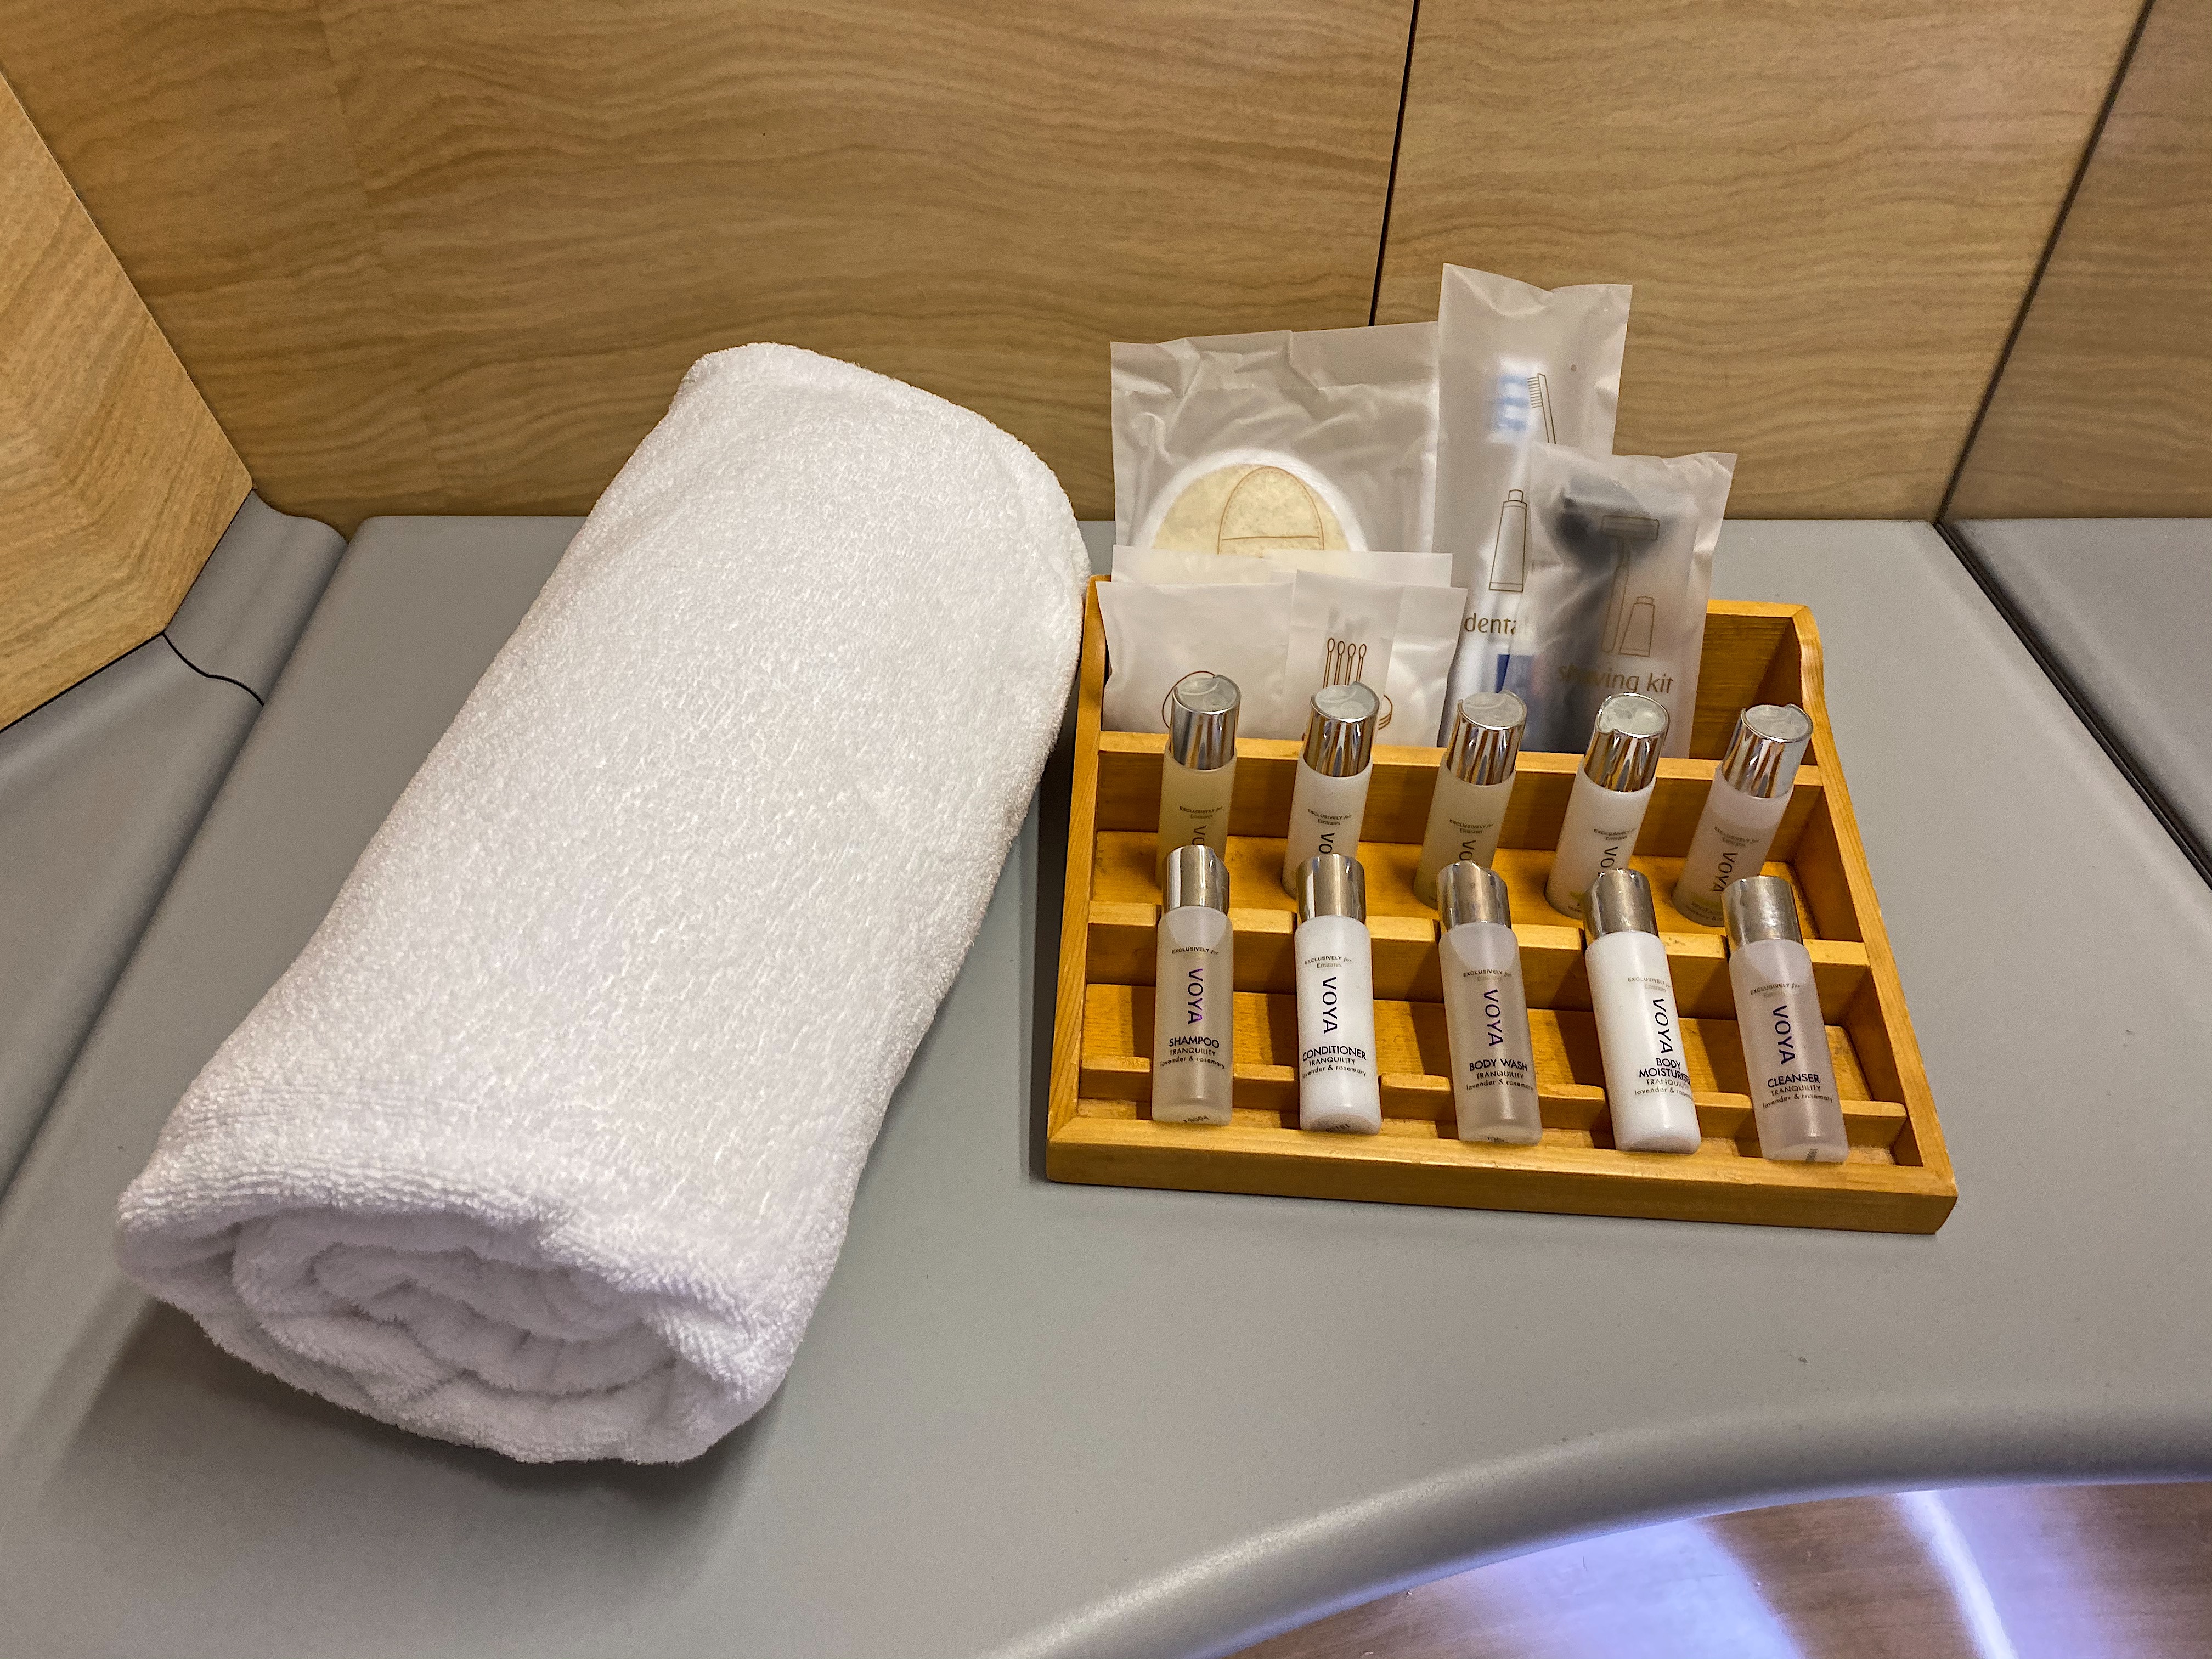 a white towel and a tray of small bottles